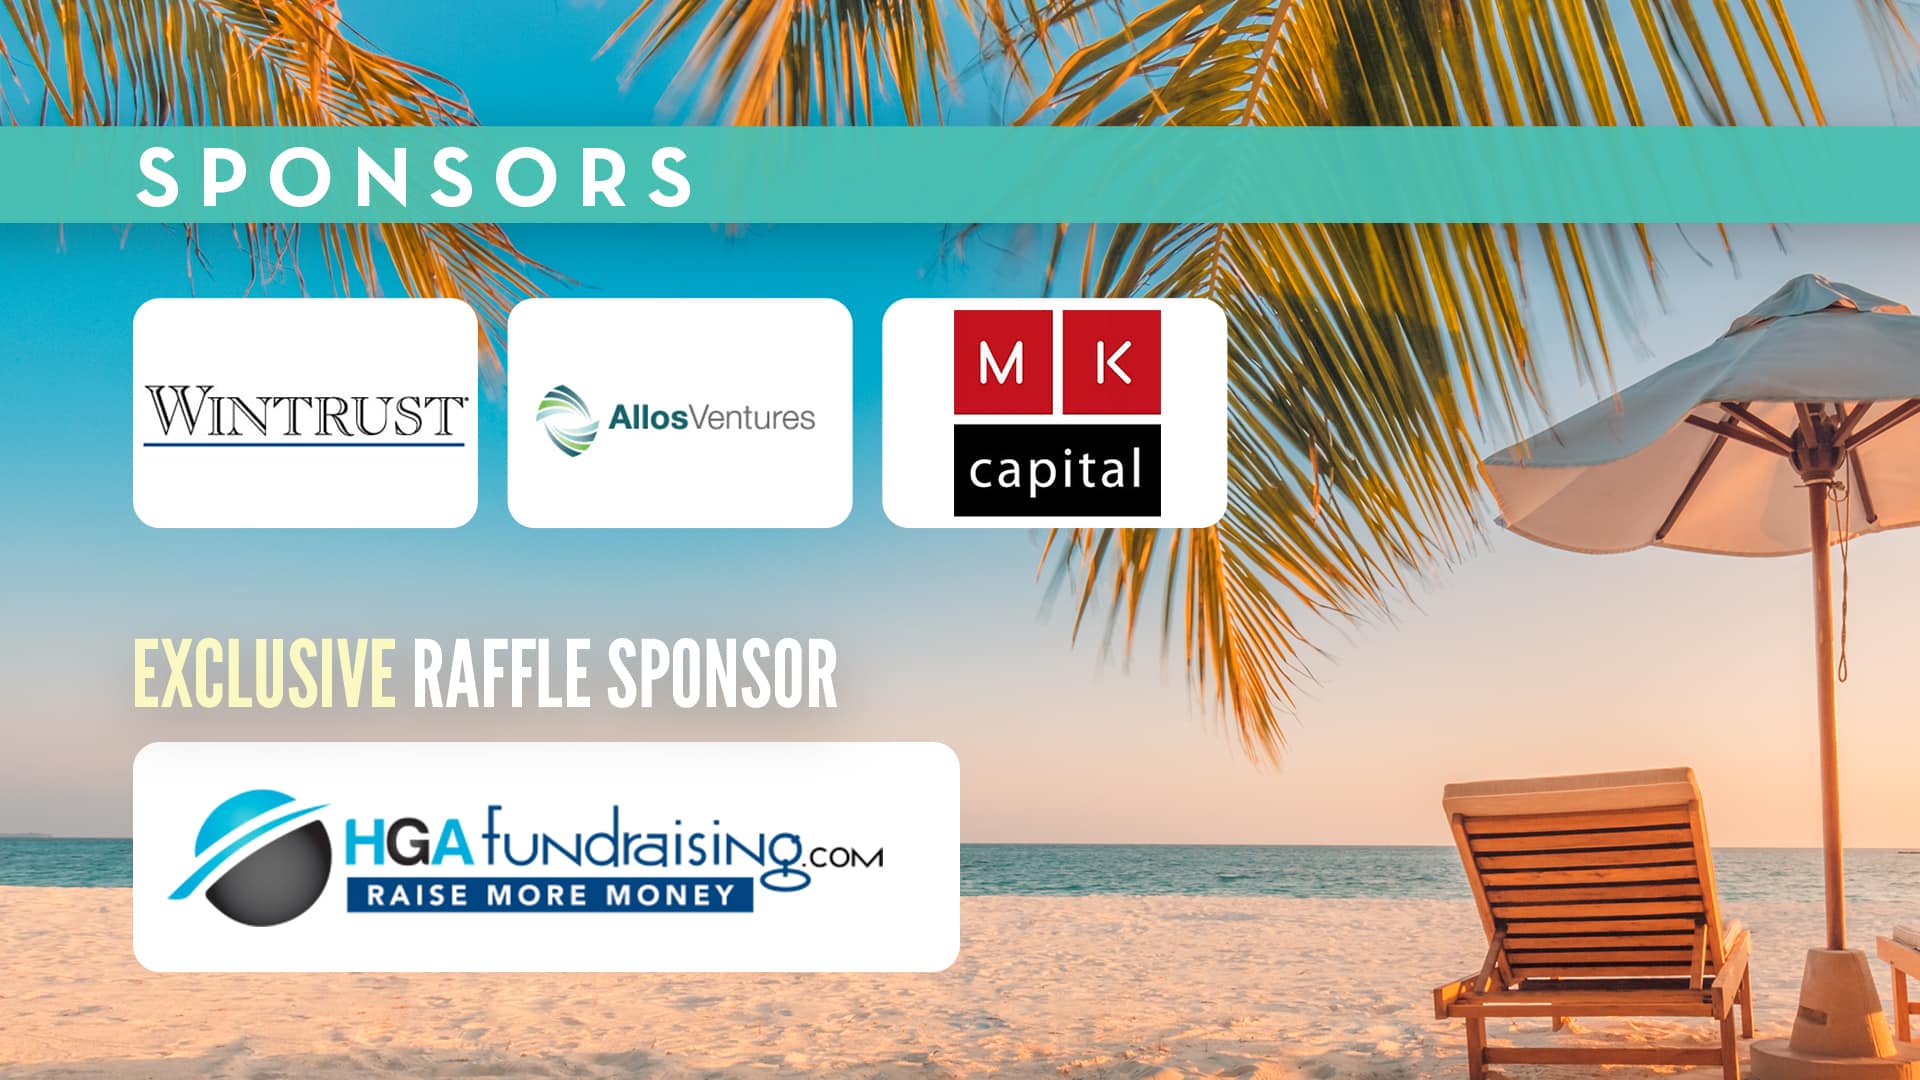 OneCause Virtual Event Sponsors